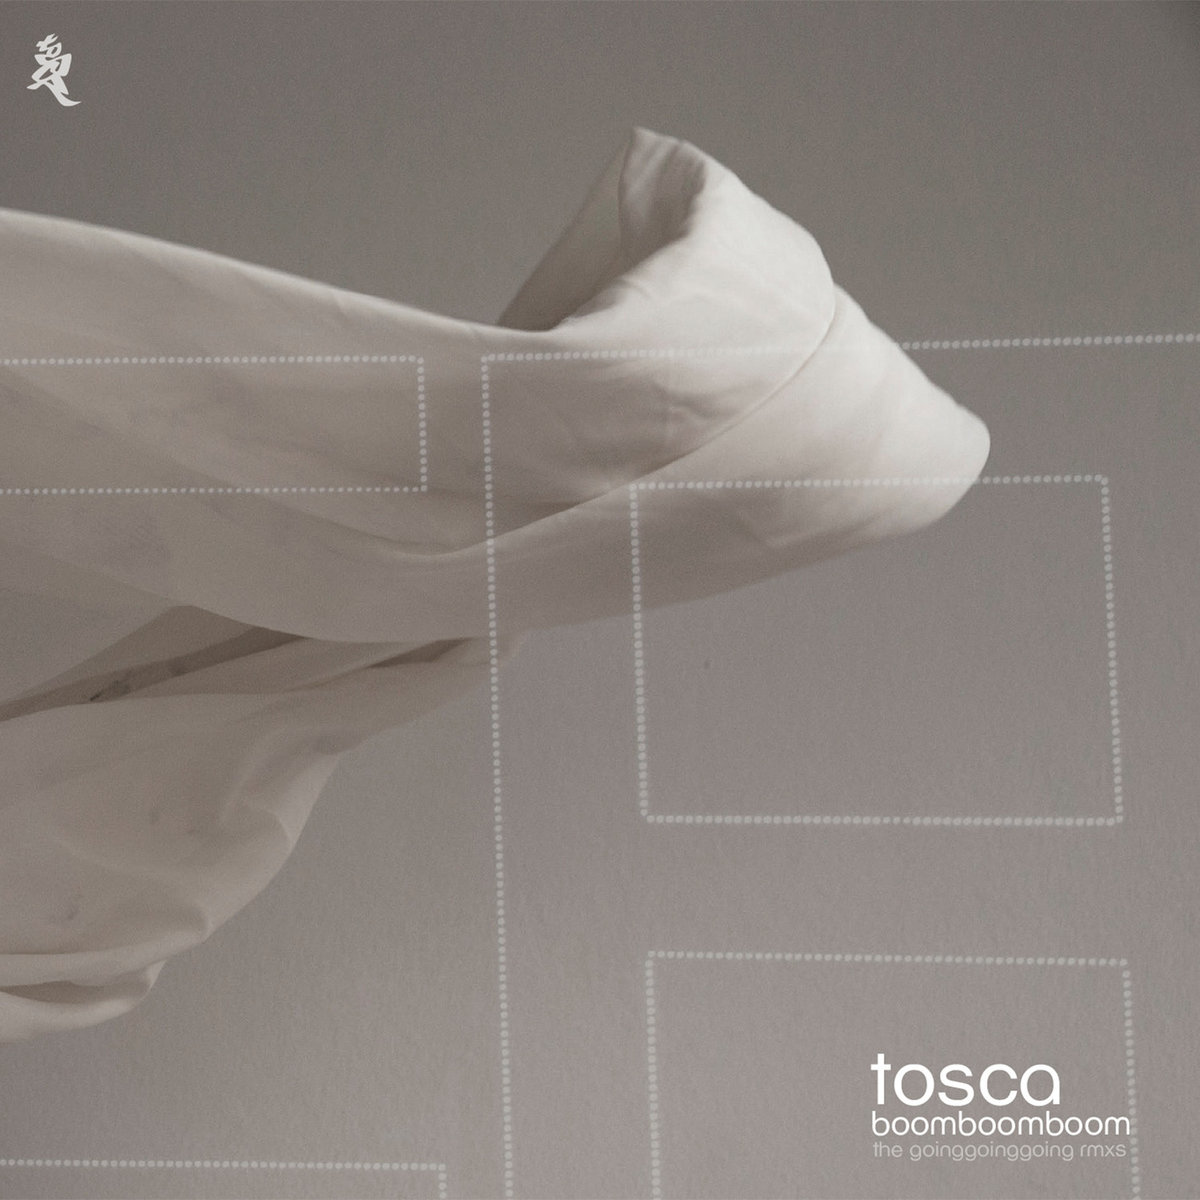 TOSCA / トスカ / BOOM BOOM BOOM (THE GOING GOING GOING REMIXES) (国内仕様盤)